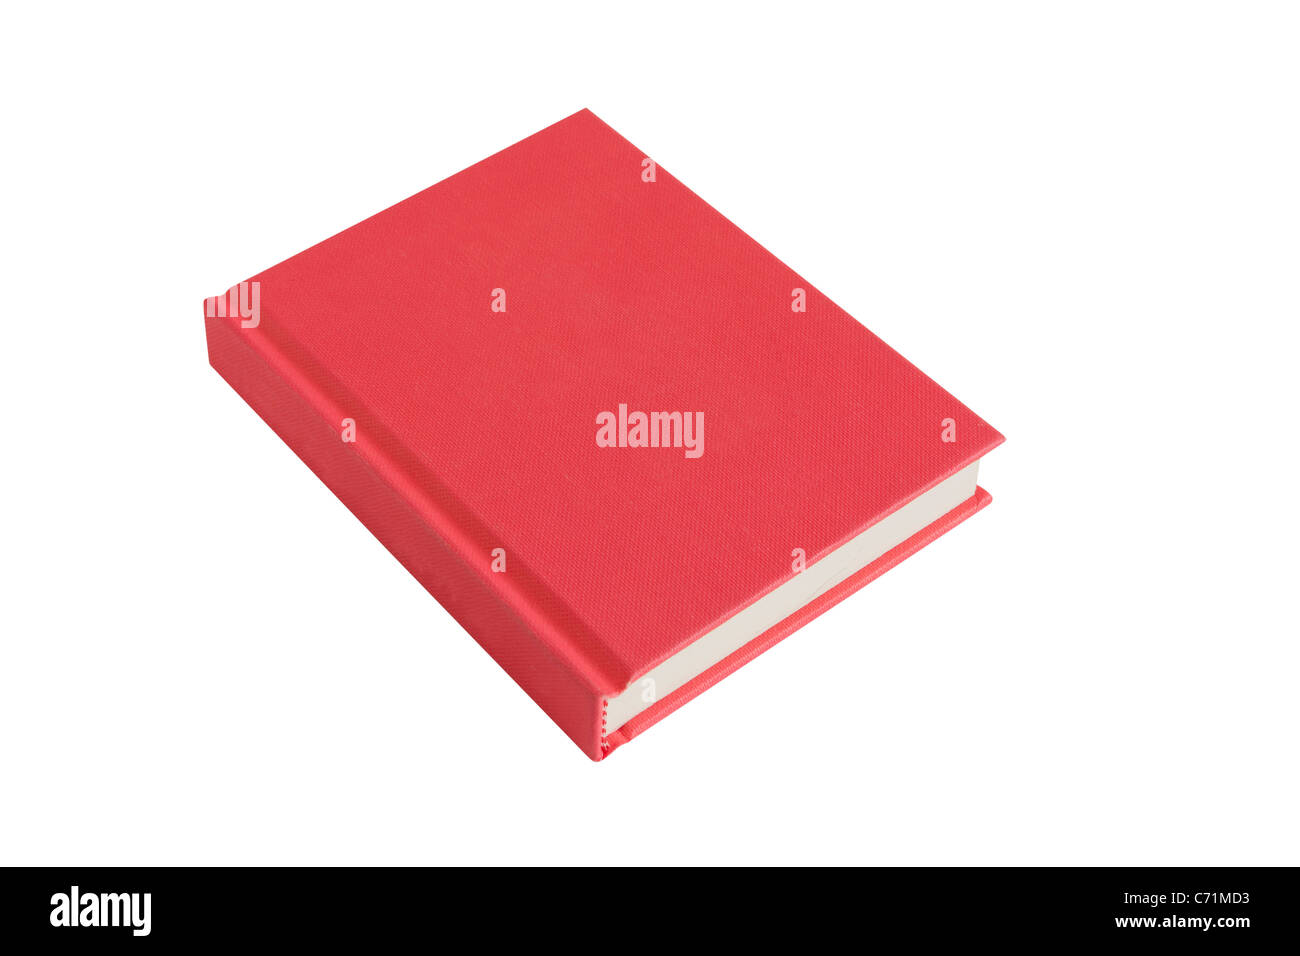 Une casebound rouge album cartonné avec spine isolated on a white abckground Banque D'Images